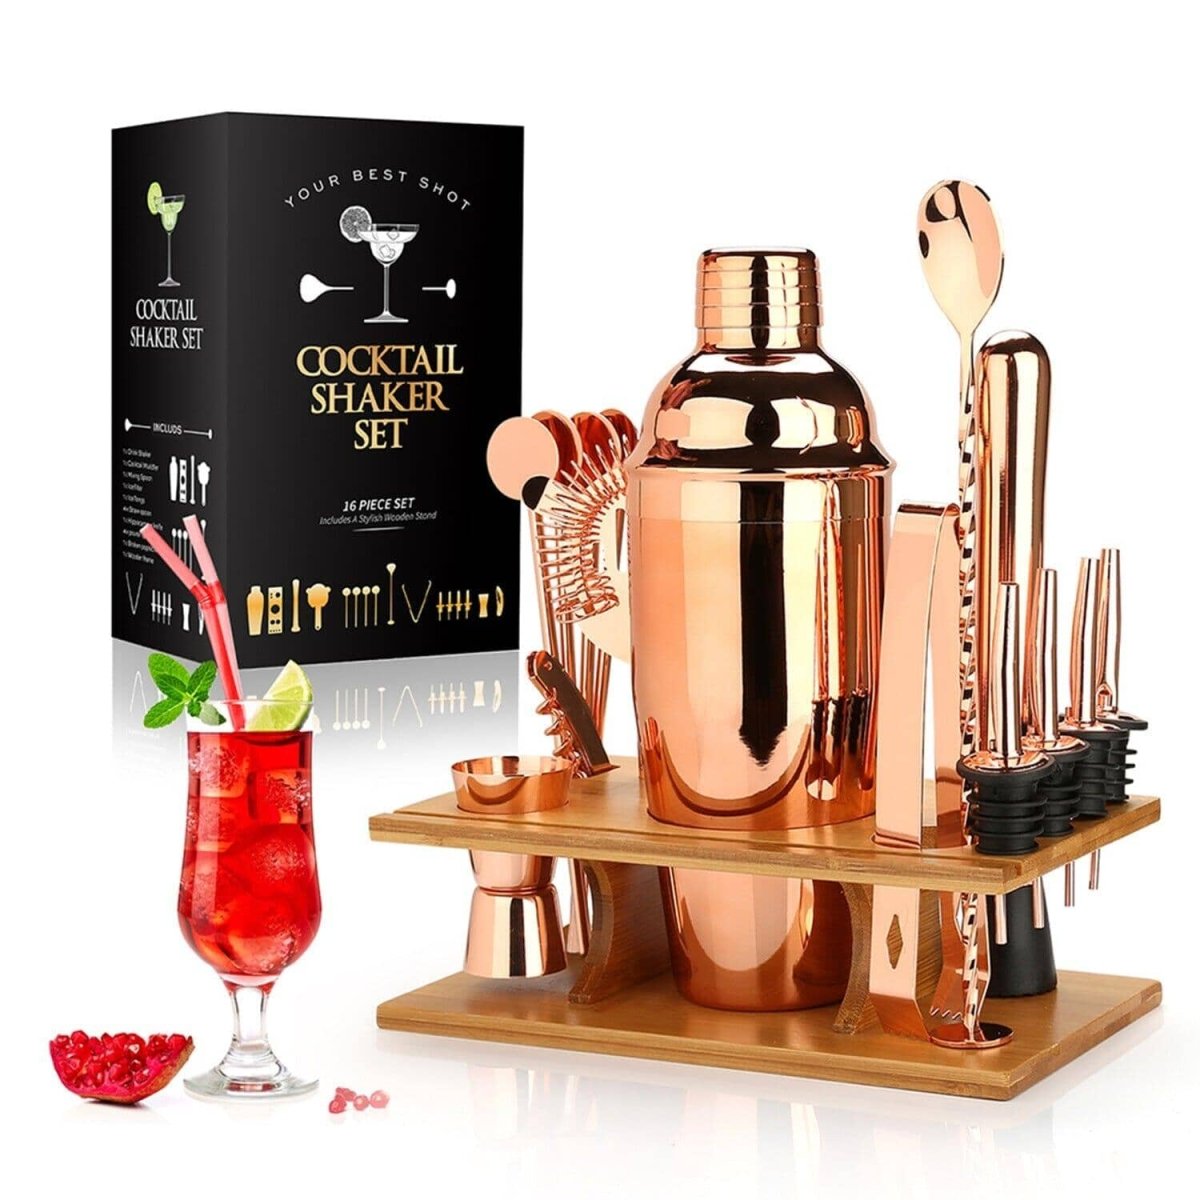 Stainless steel cocktail shaker from a 16-piece mixology kit